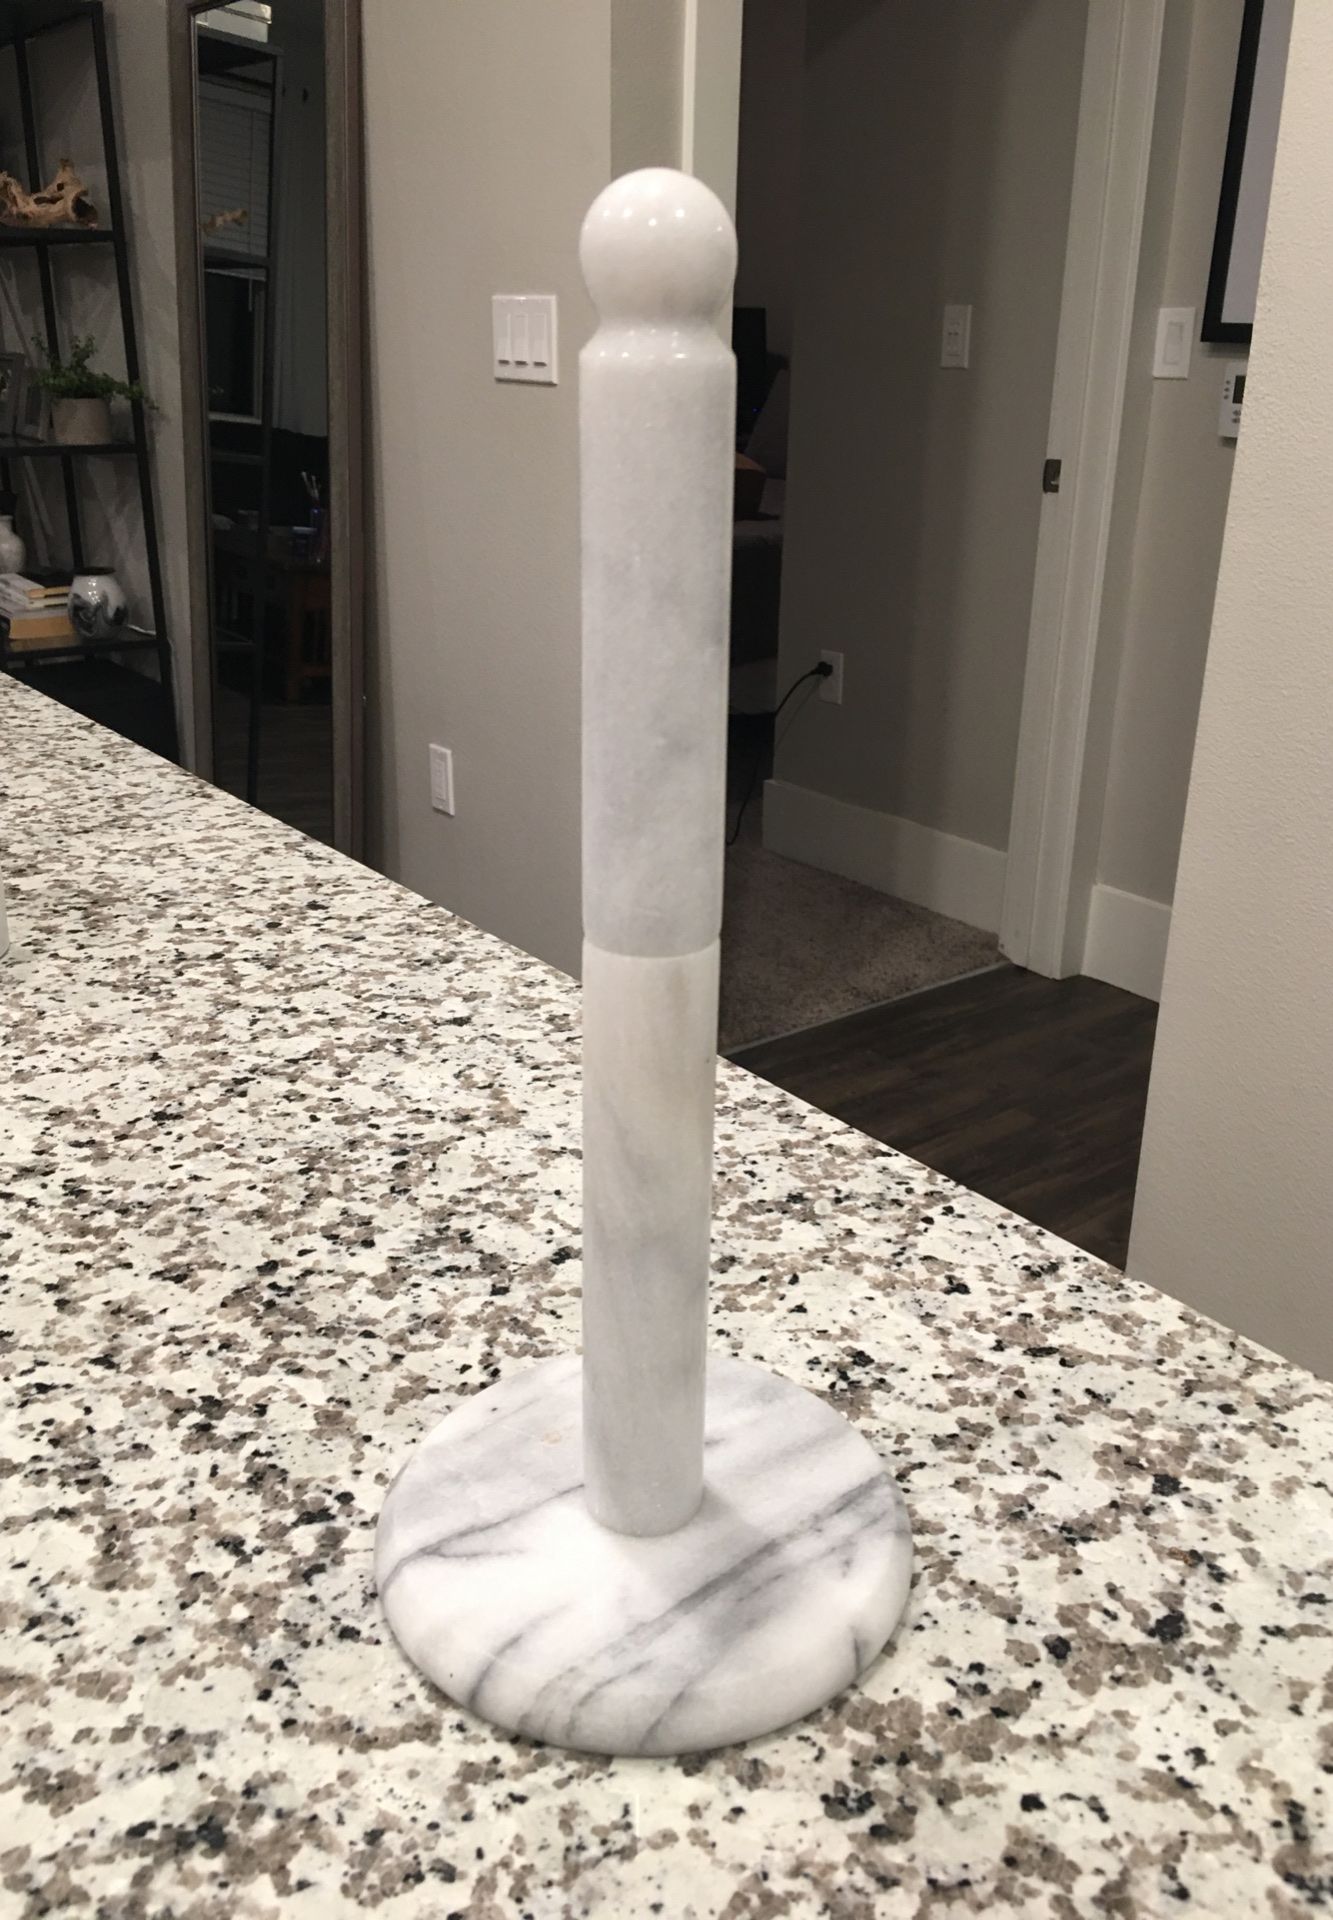 Brand new solid marble paper towel holder